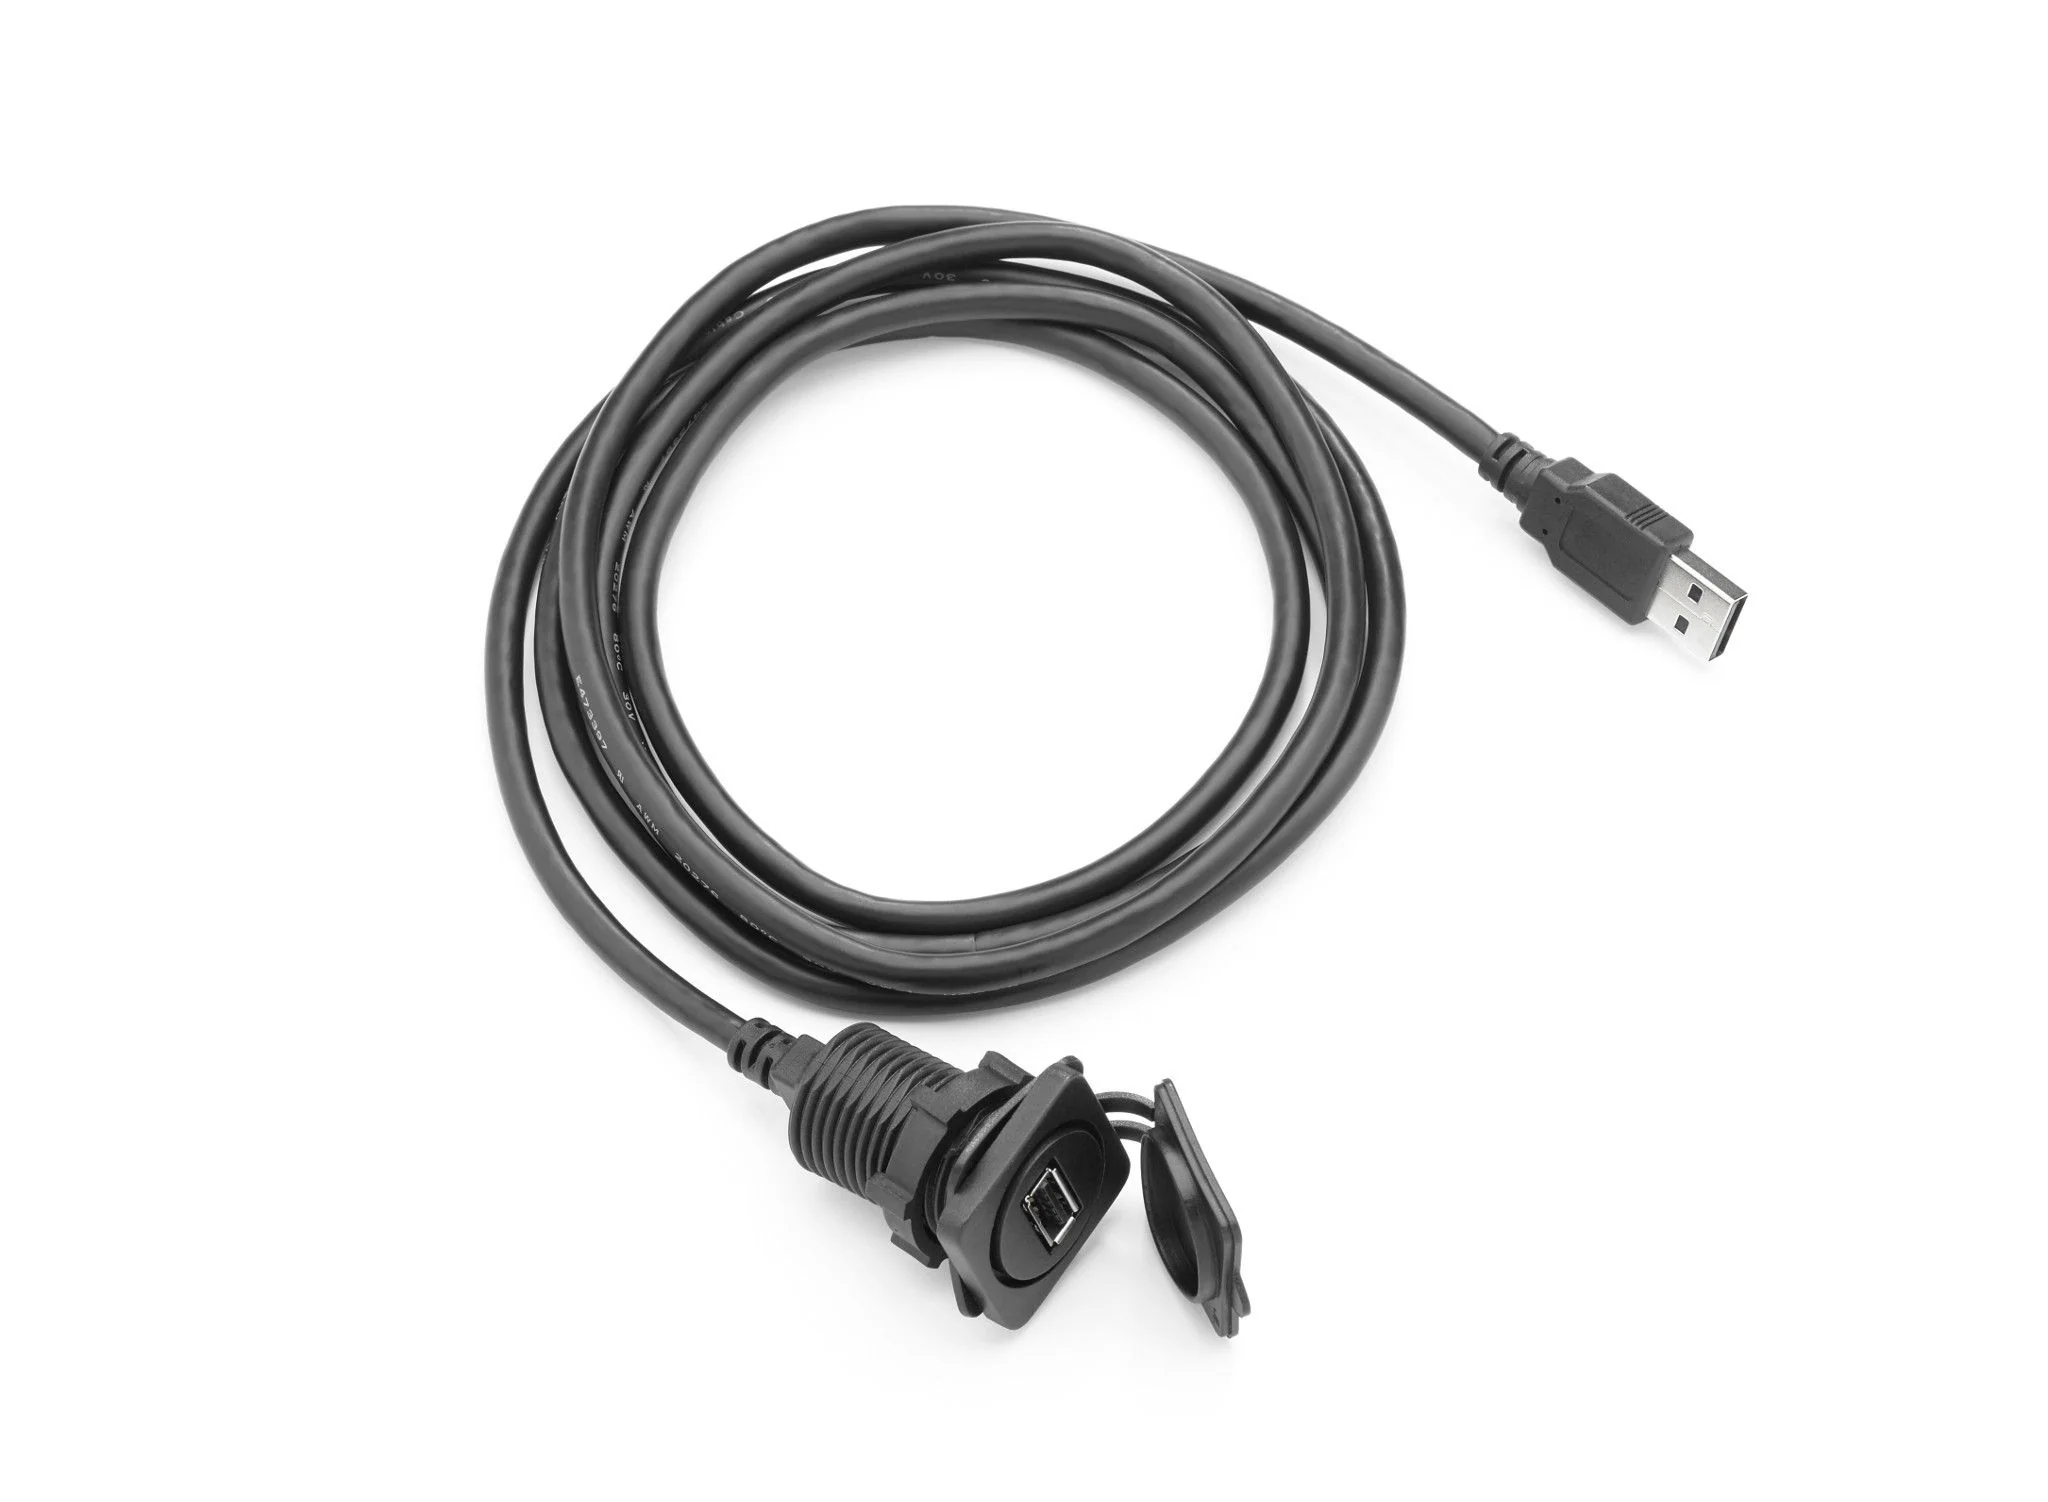 Cable USB port 6ft compatible with USB 2.0 and 3.0 suitable for panel mounting